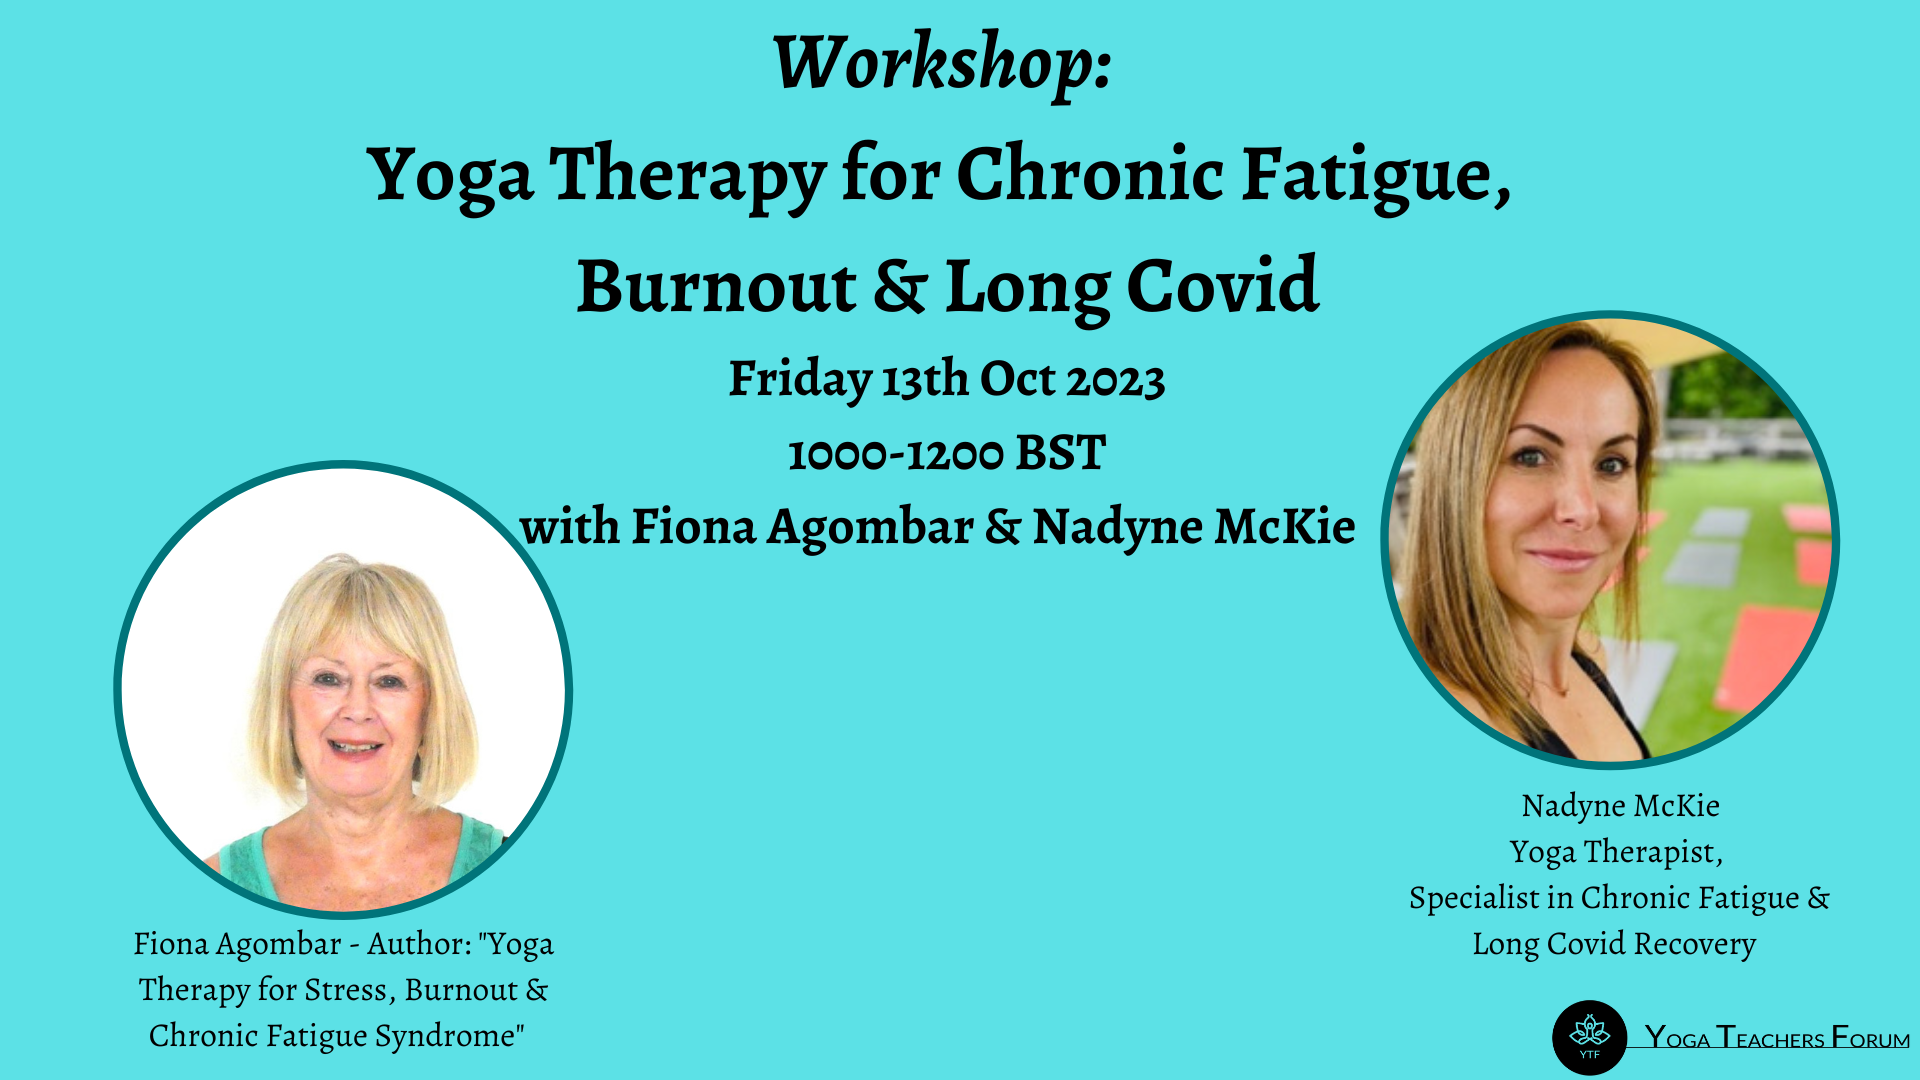 Workshop Yoga Therapy for Chronic Fatigue